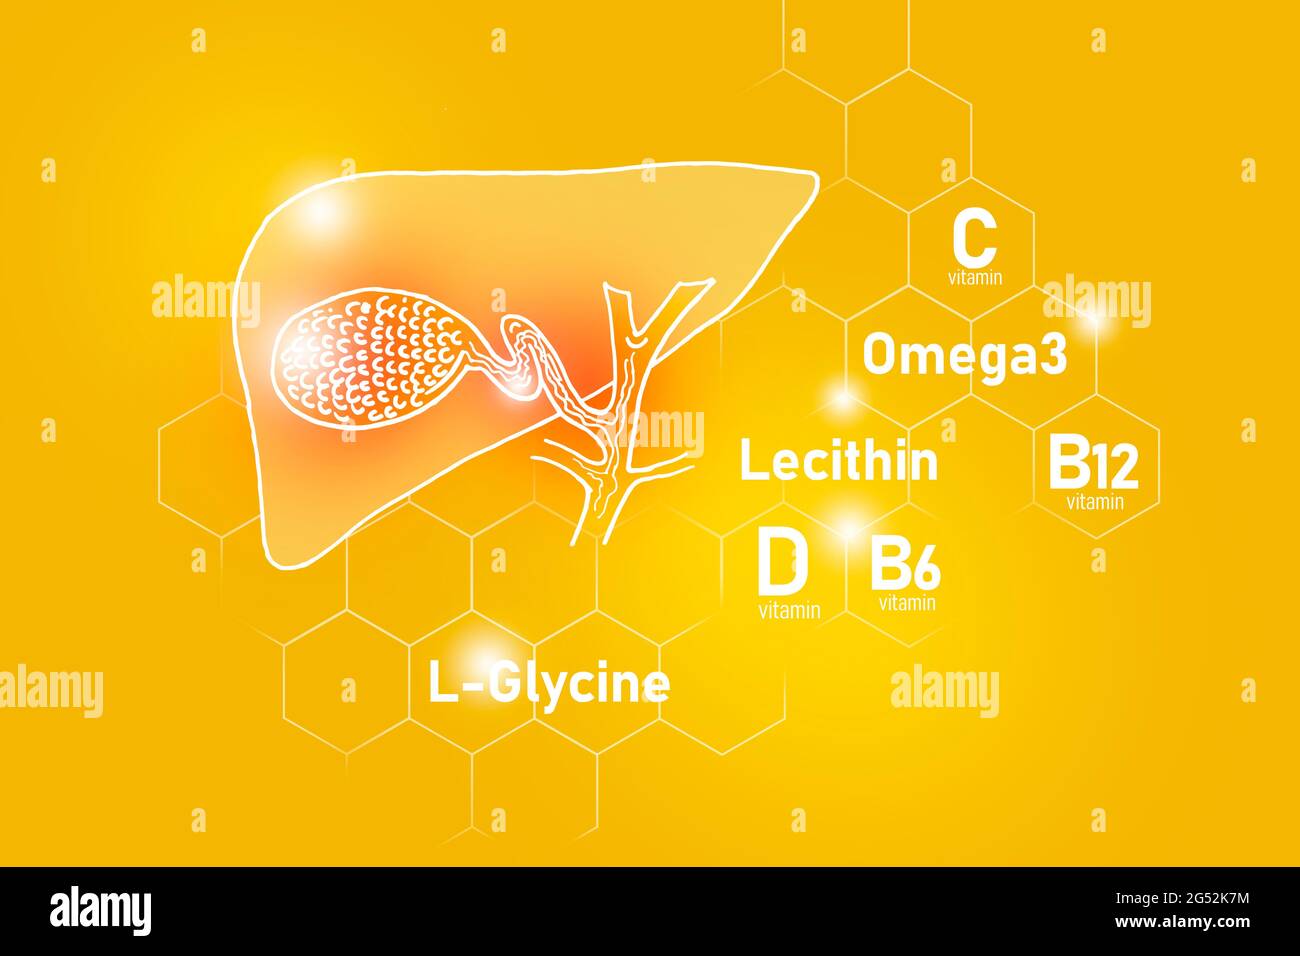 Essential nutrients for Gall Bladder health including Omega 3, L-Glycine, Omega3, Lecithin on yellow background. Stock Photo